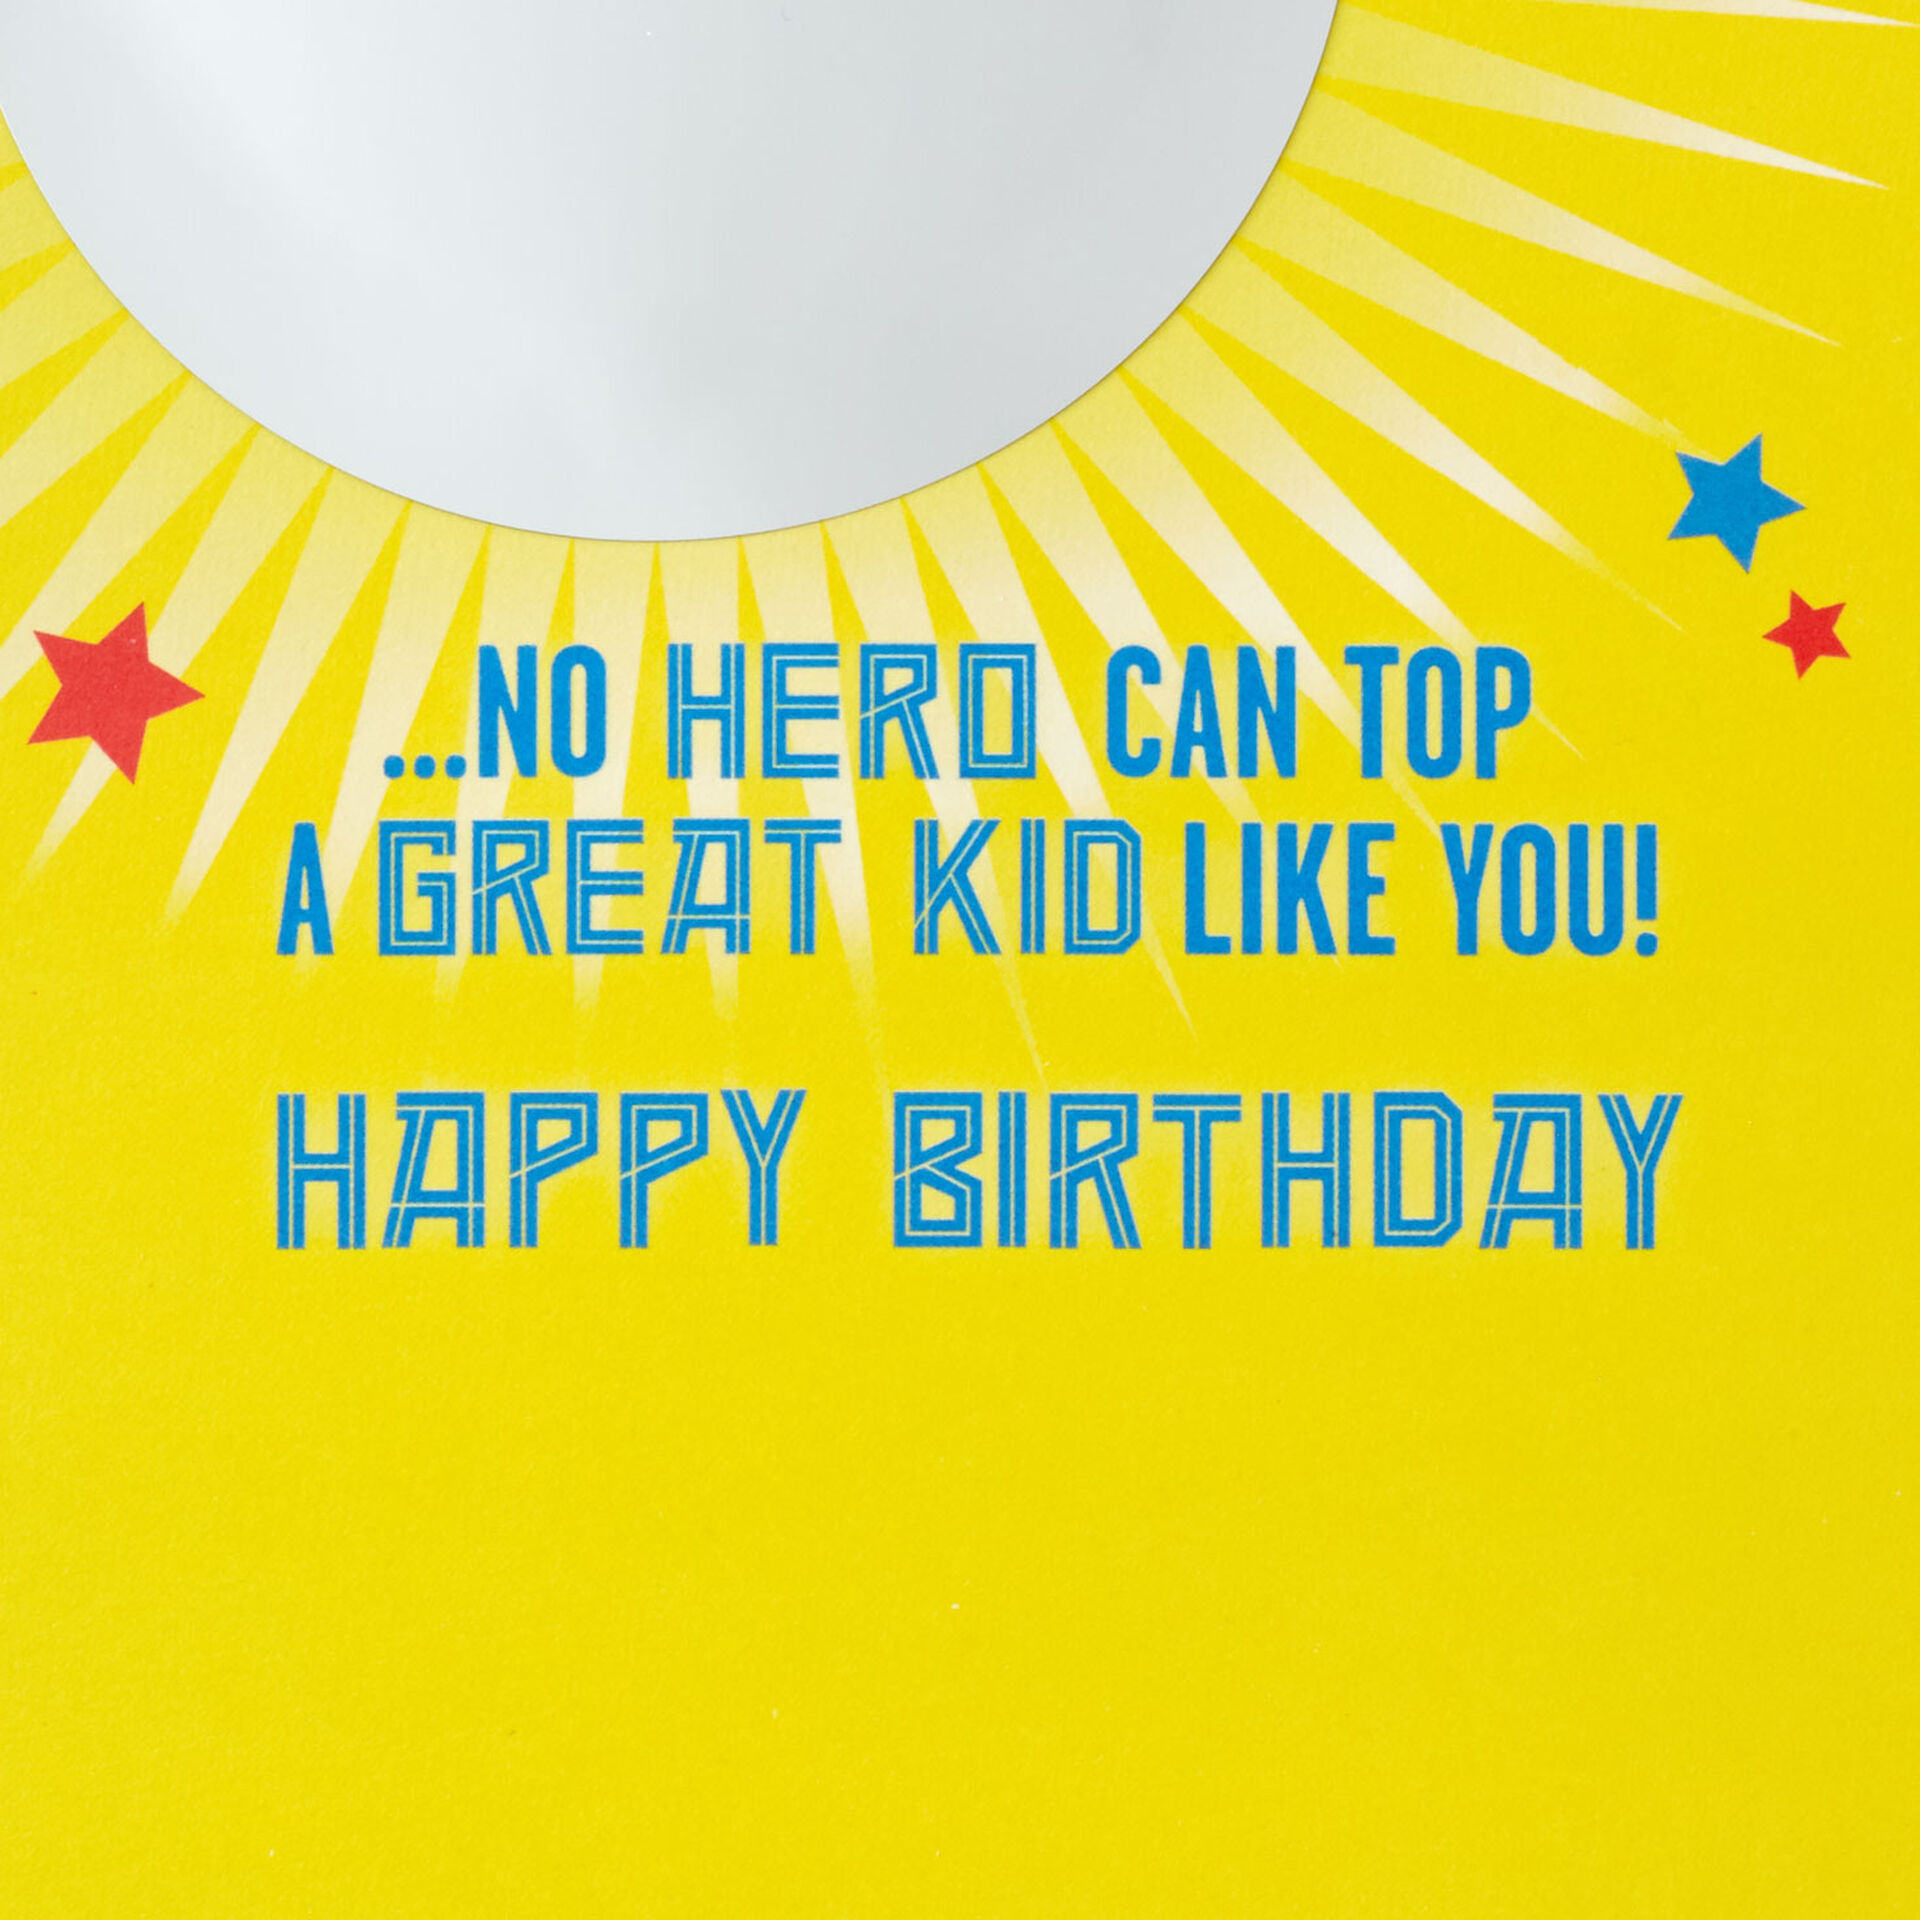 Marvel-SpiderMan-and-Mirror-Birthday-Card-for-Kids_399HKB9087_02